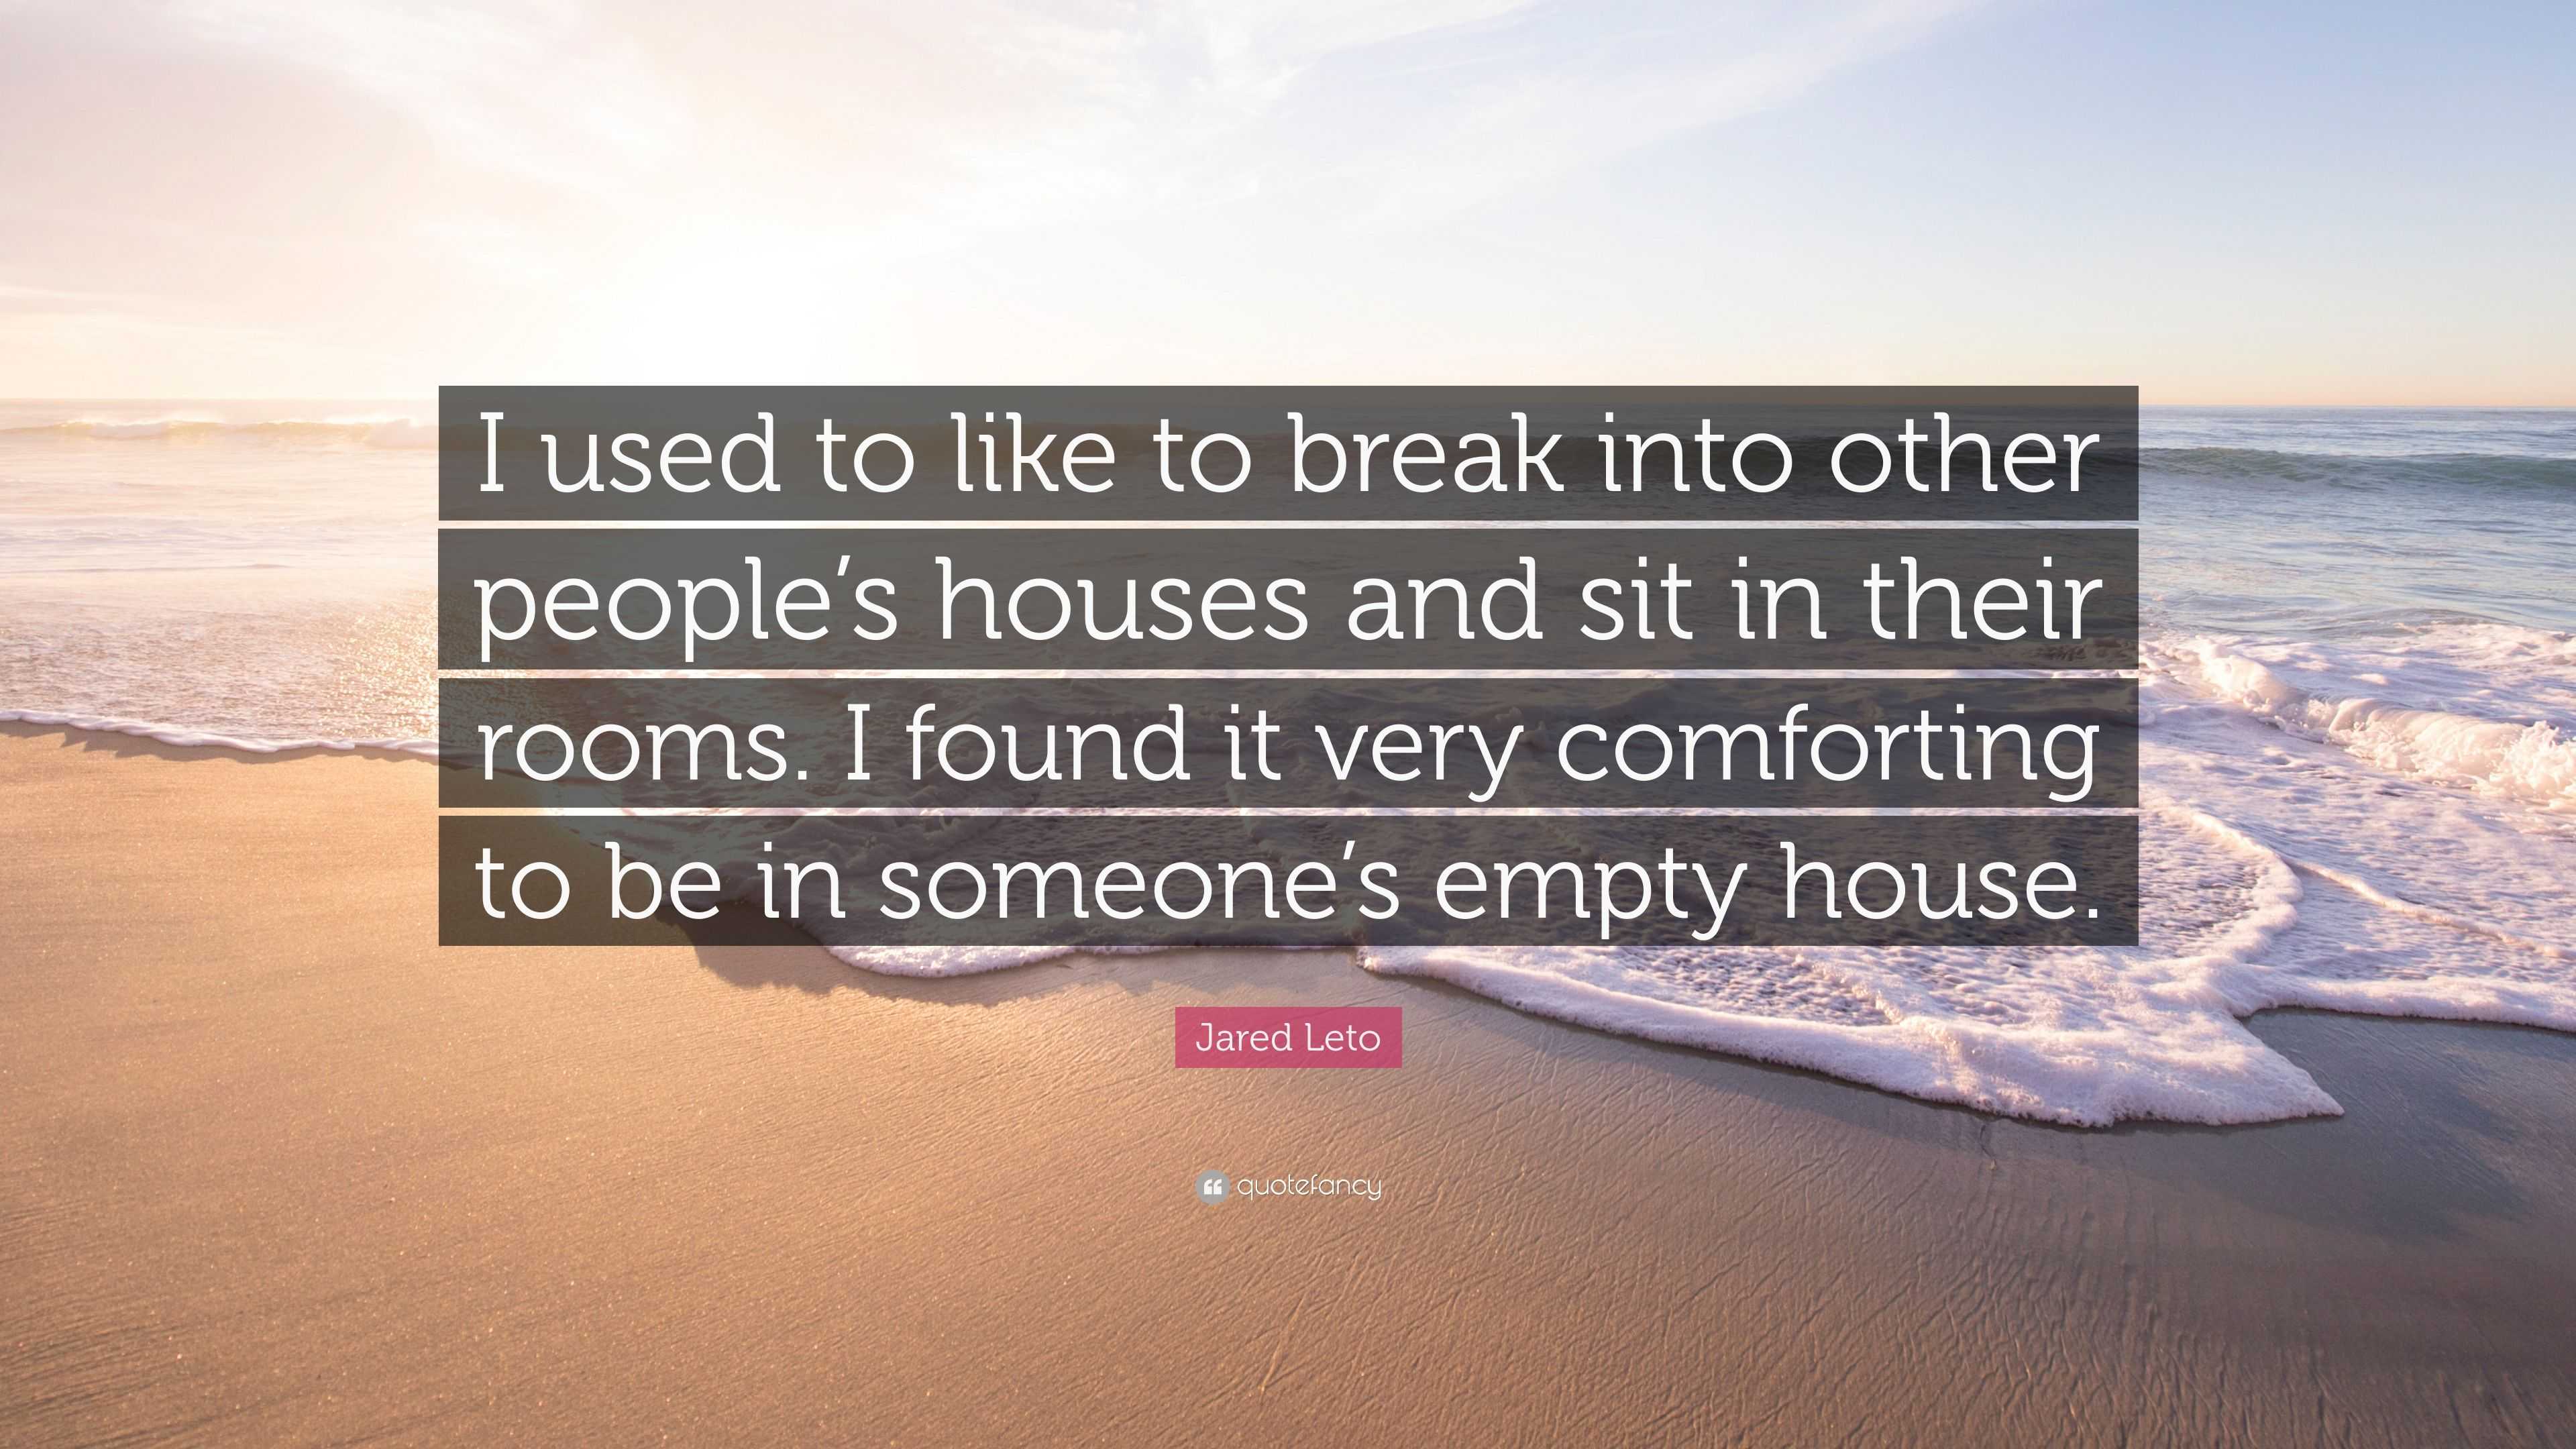 Jared Leto Quote: “I used to like to break into other people’s houses ...